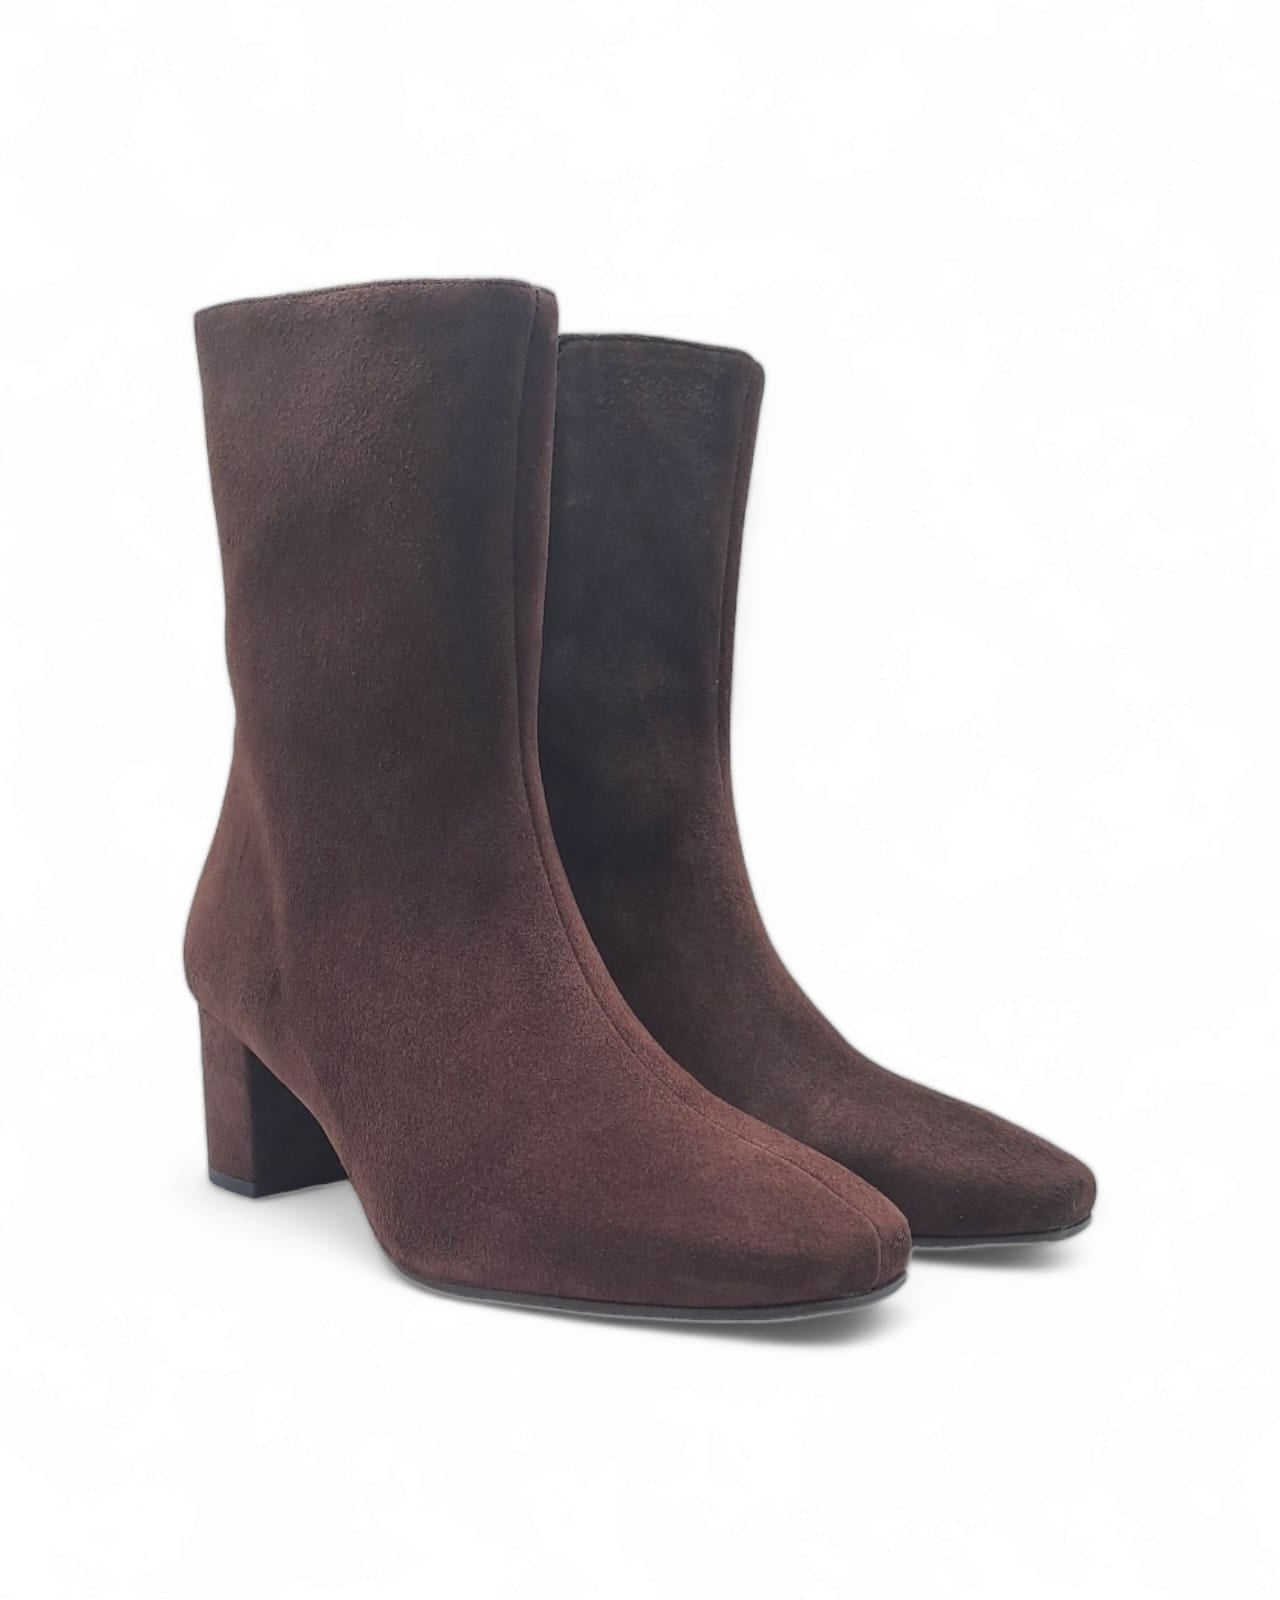 Silvana ankle boot in dark brown suede